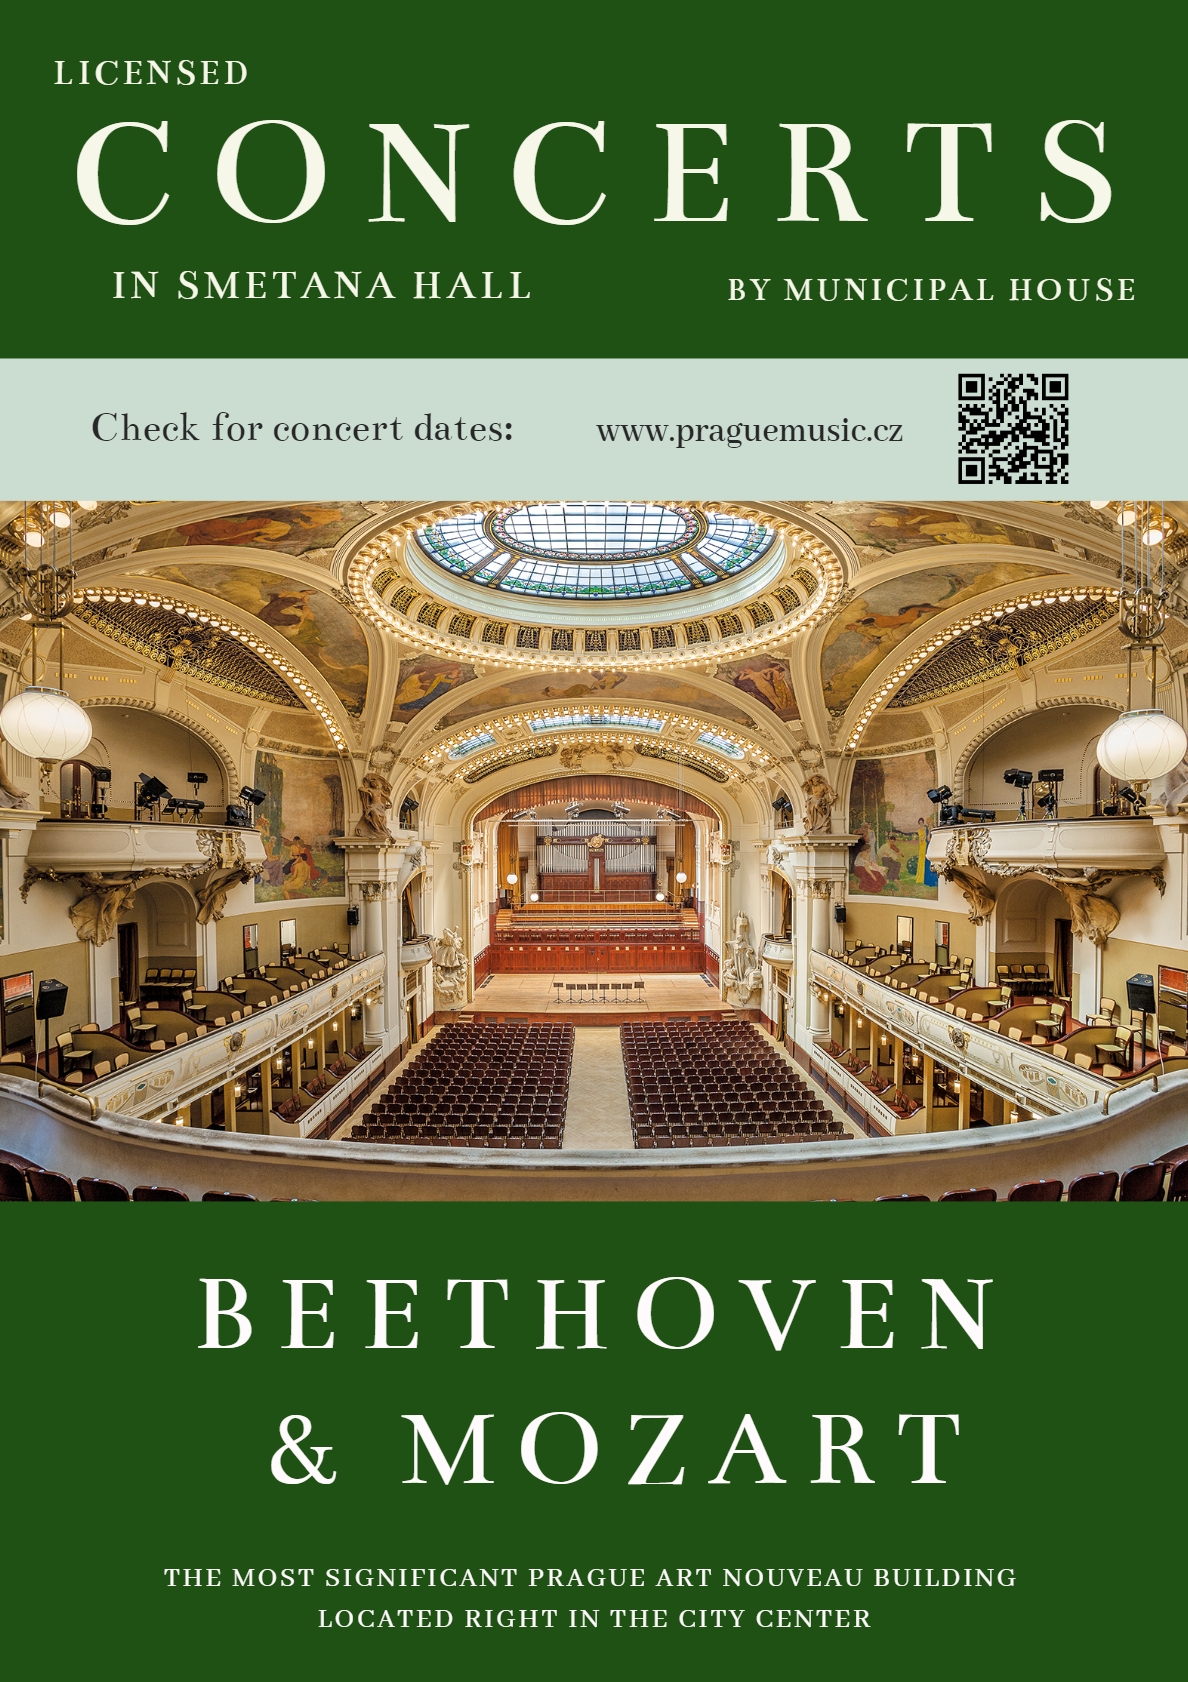 Beethoven & Mozart in the Municipal House